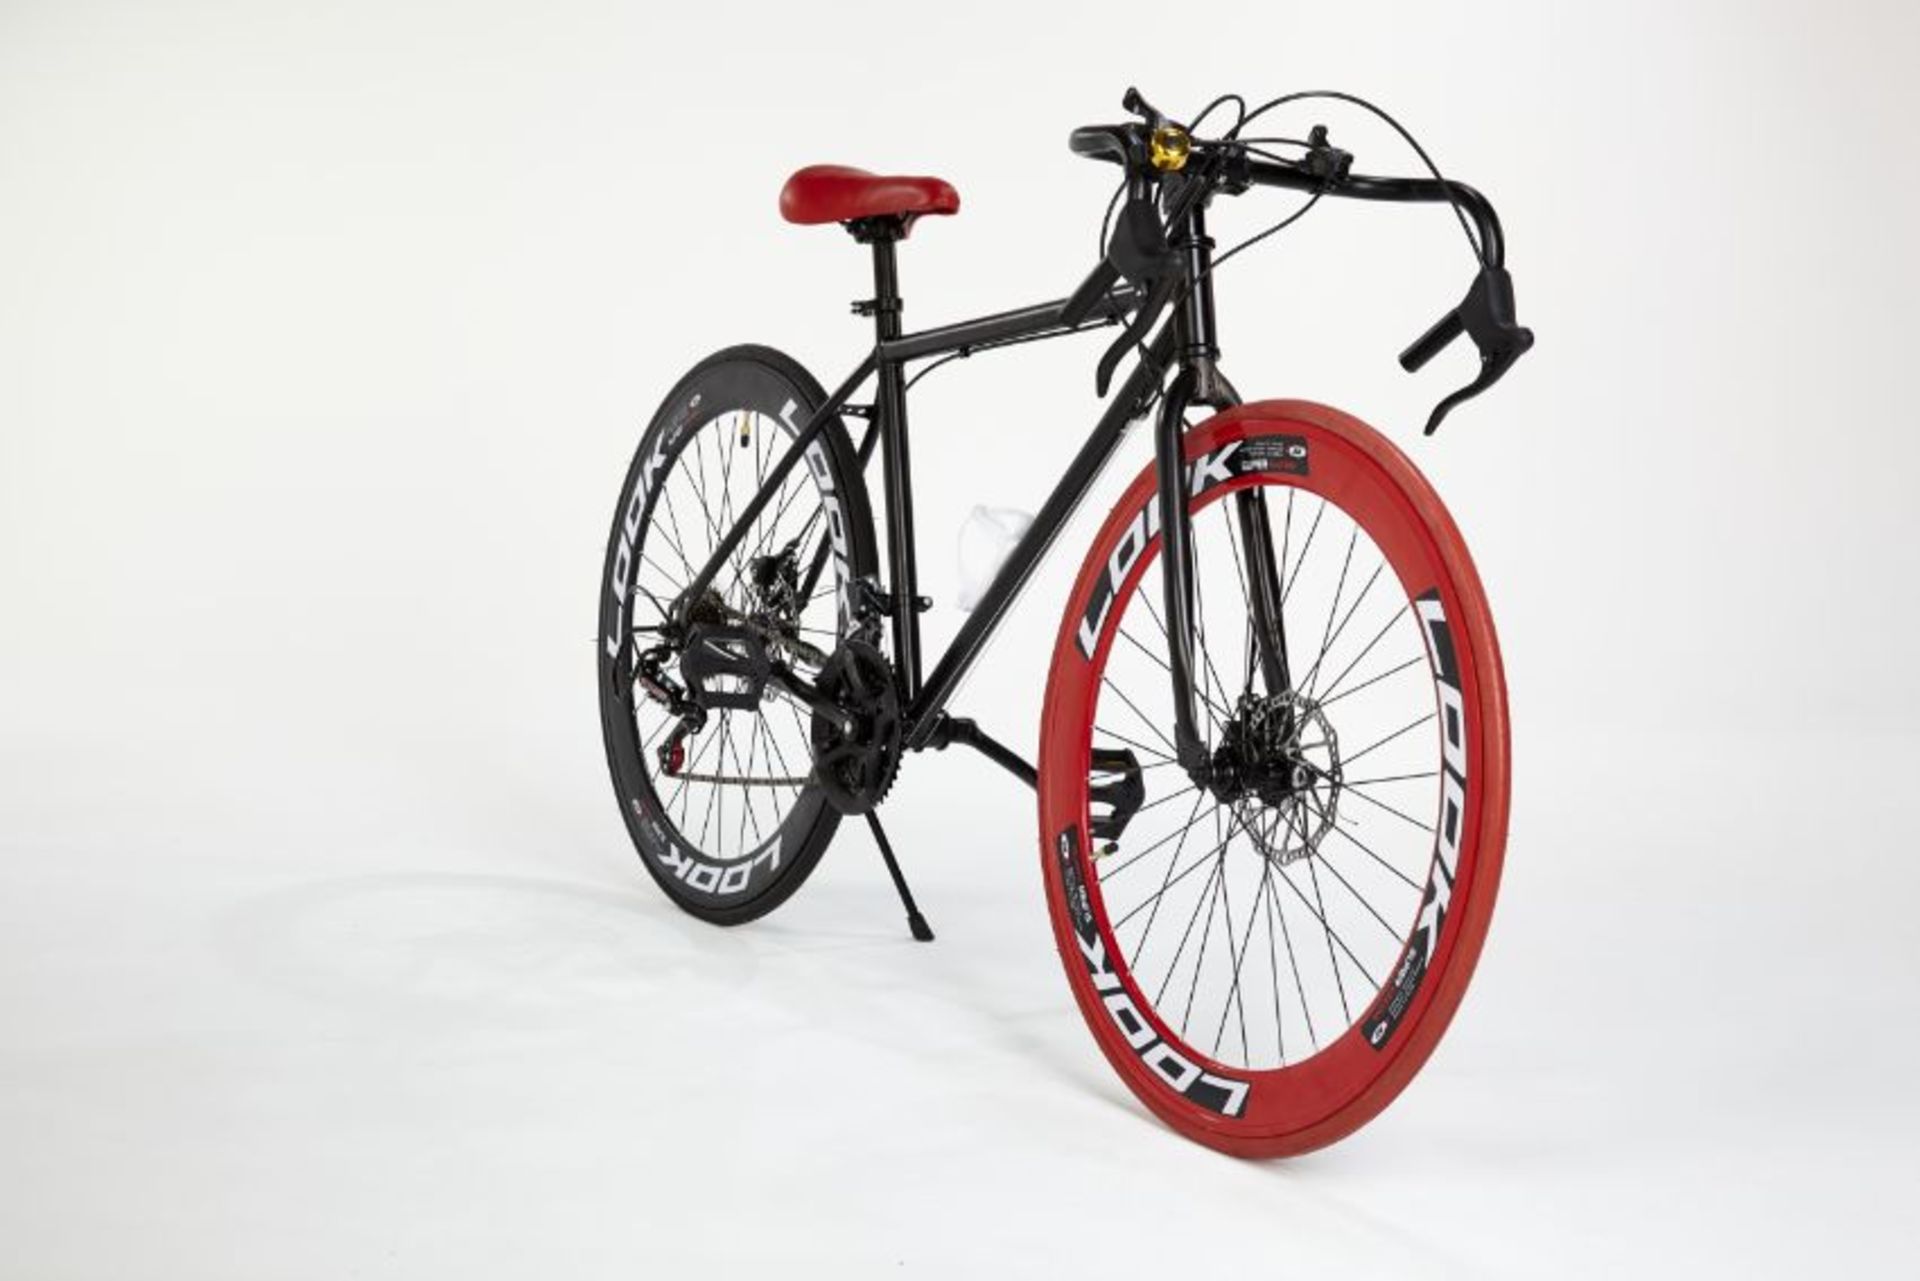 RED/BLACK STREET BIKE WITH 21 GREAR, BRAKE DISKS, KICK STAND, COOL THIN TYRES COMES BOXED